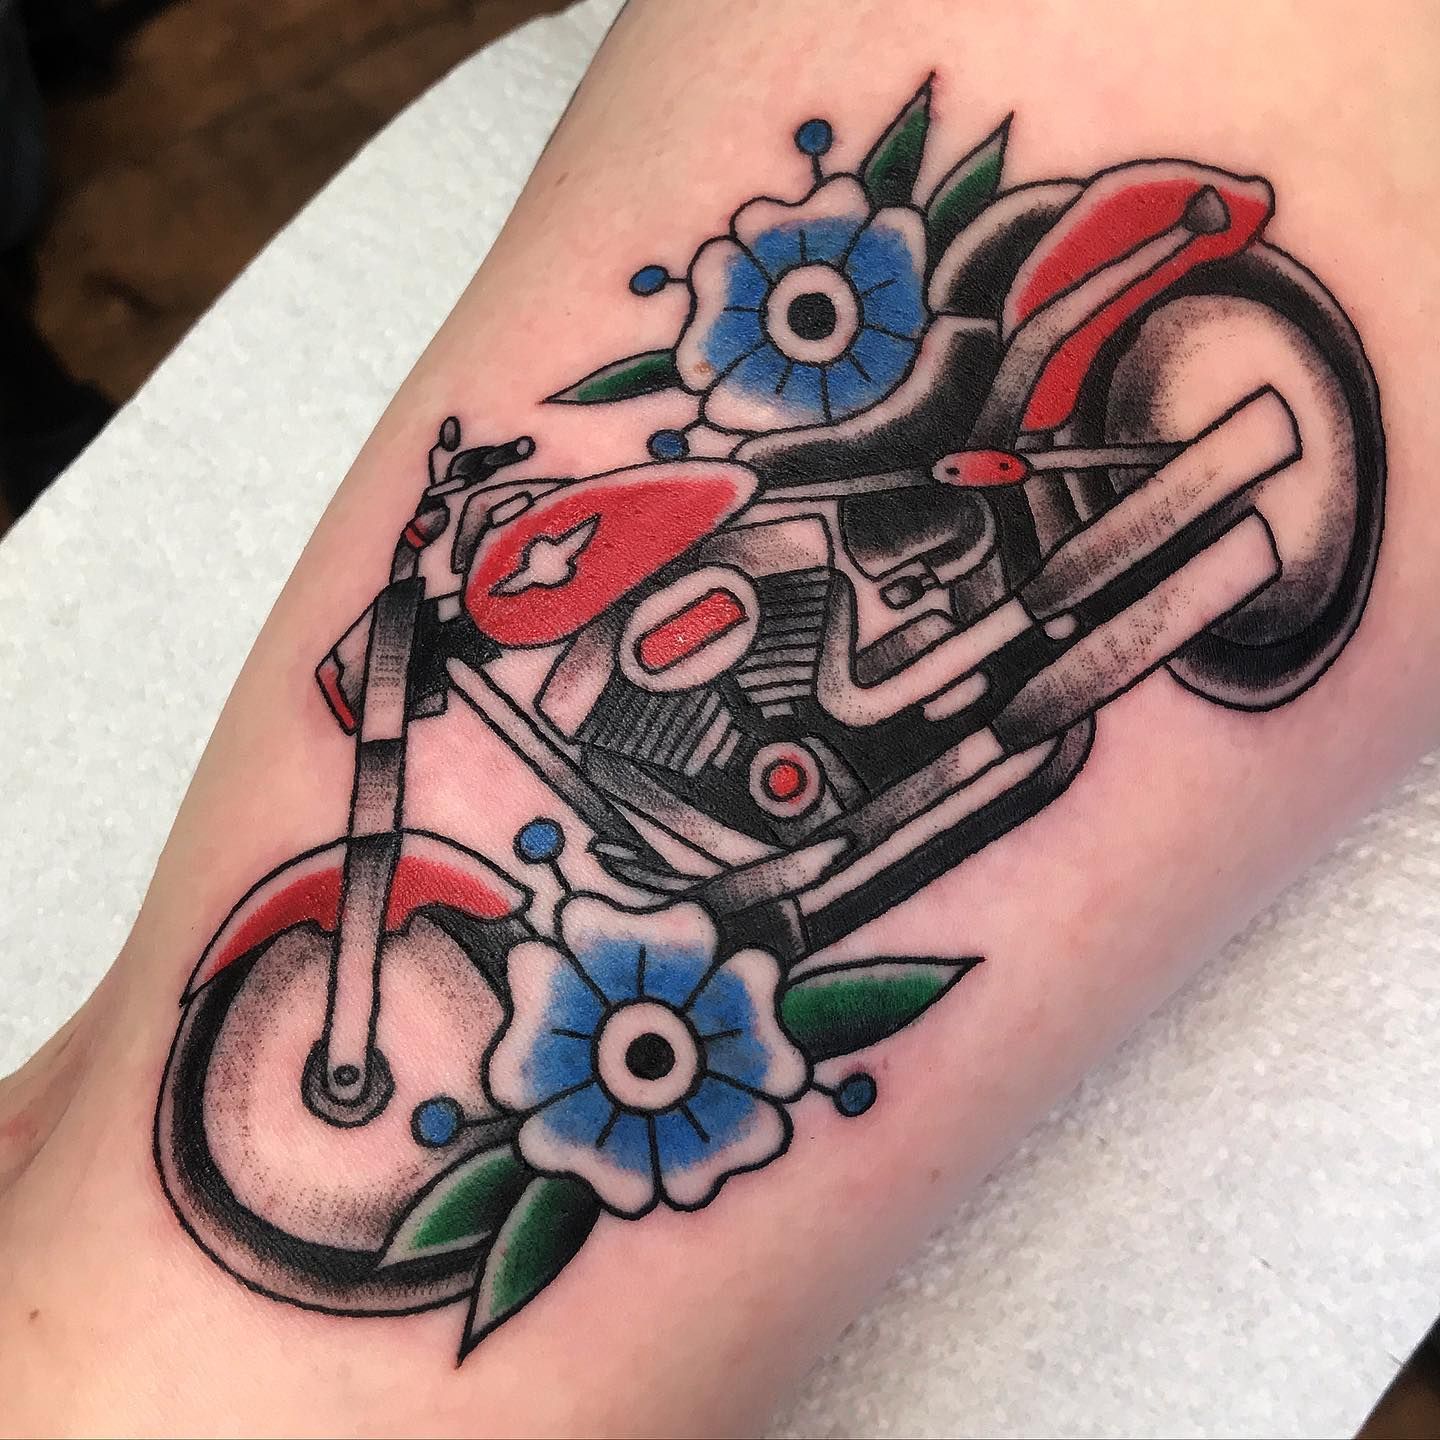 Shark on a motorcycle by Lilly at Sweetneedles Tattoo in SLC, Utah : r/ tattoos